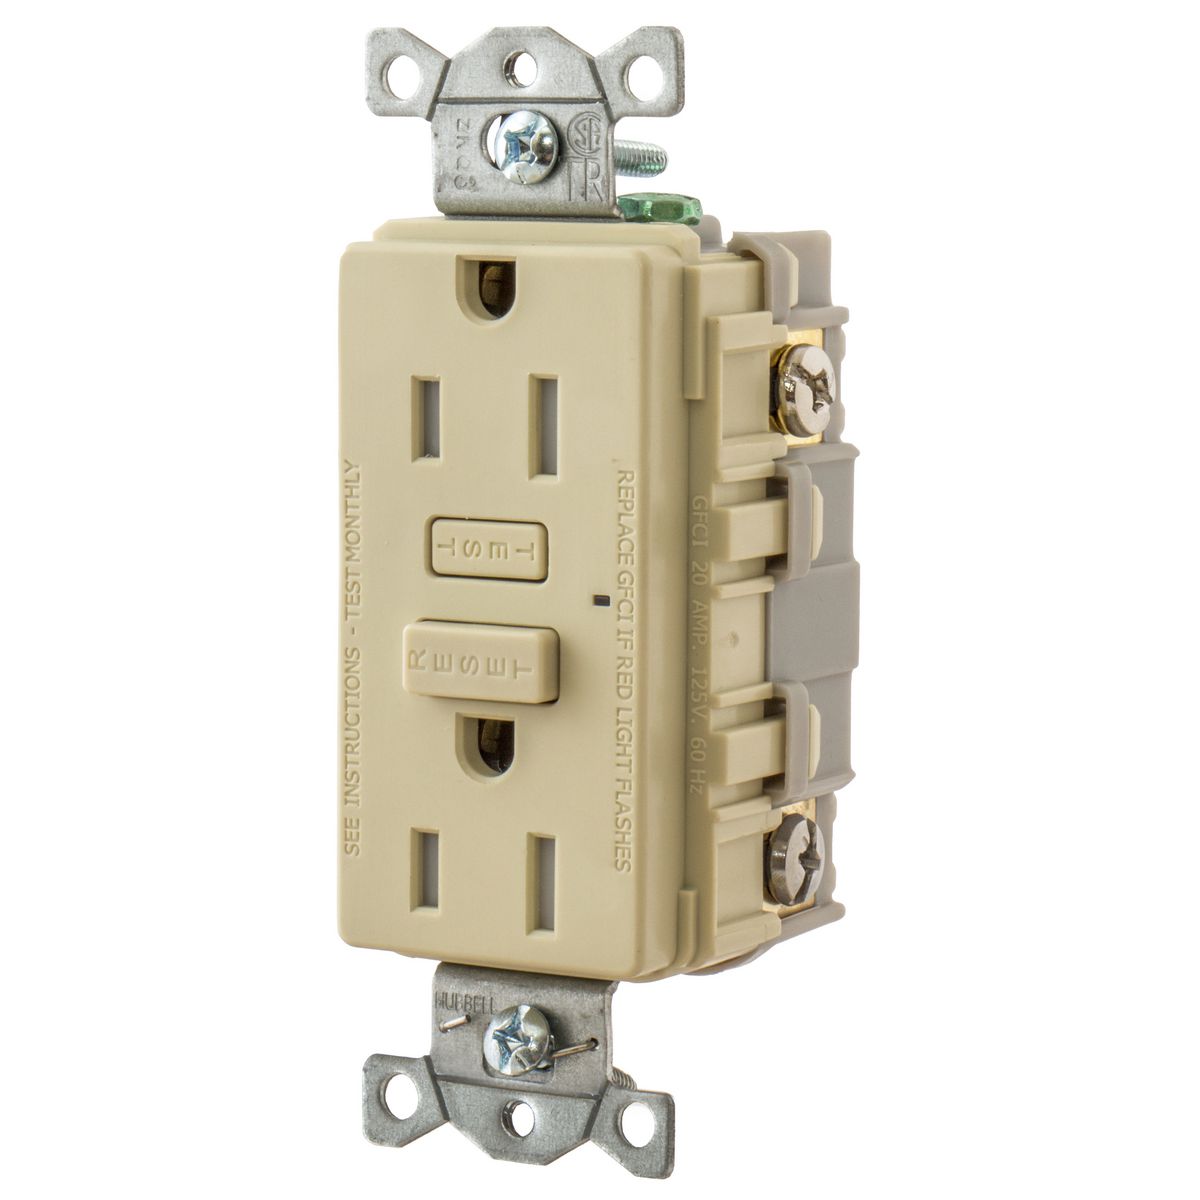 Hubbell Wiring Device Kellems, Power Protective Products, GFCIReceptacle, Hubbell Pro, 15A 125V AC, 2-Pole 3-Wire Grounding, 5-15R,Ivory